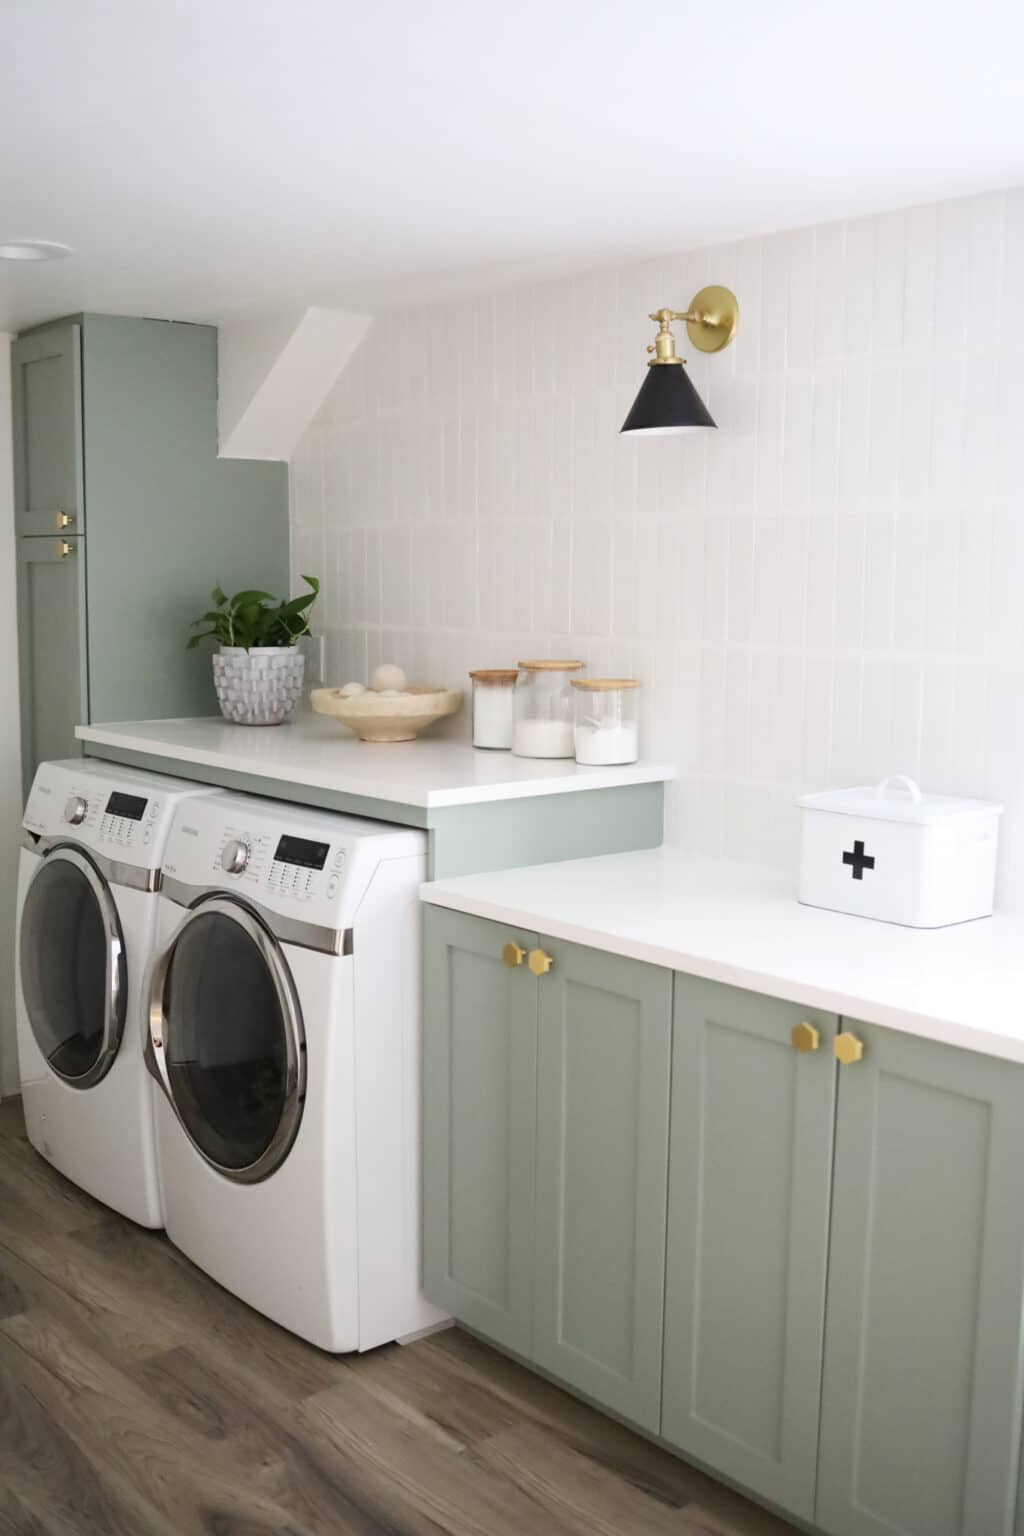 Find Out How Designers' Saved $4,000 on This Laundry Room Renovation